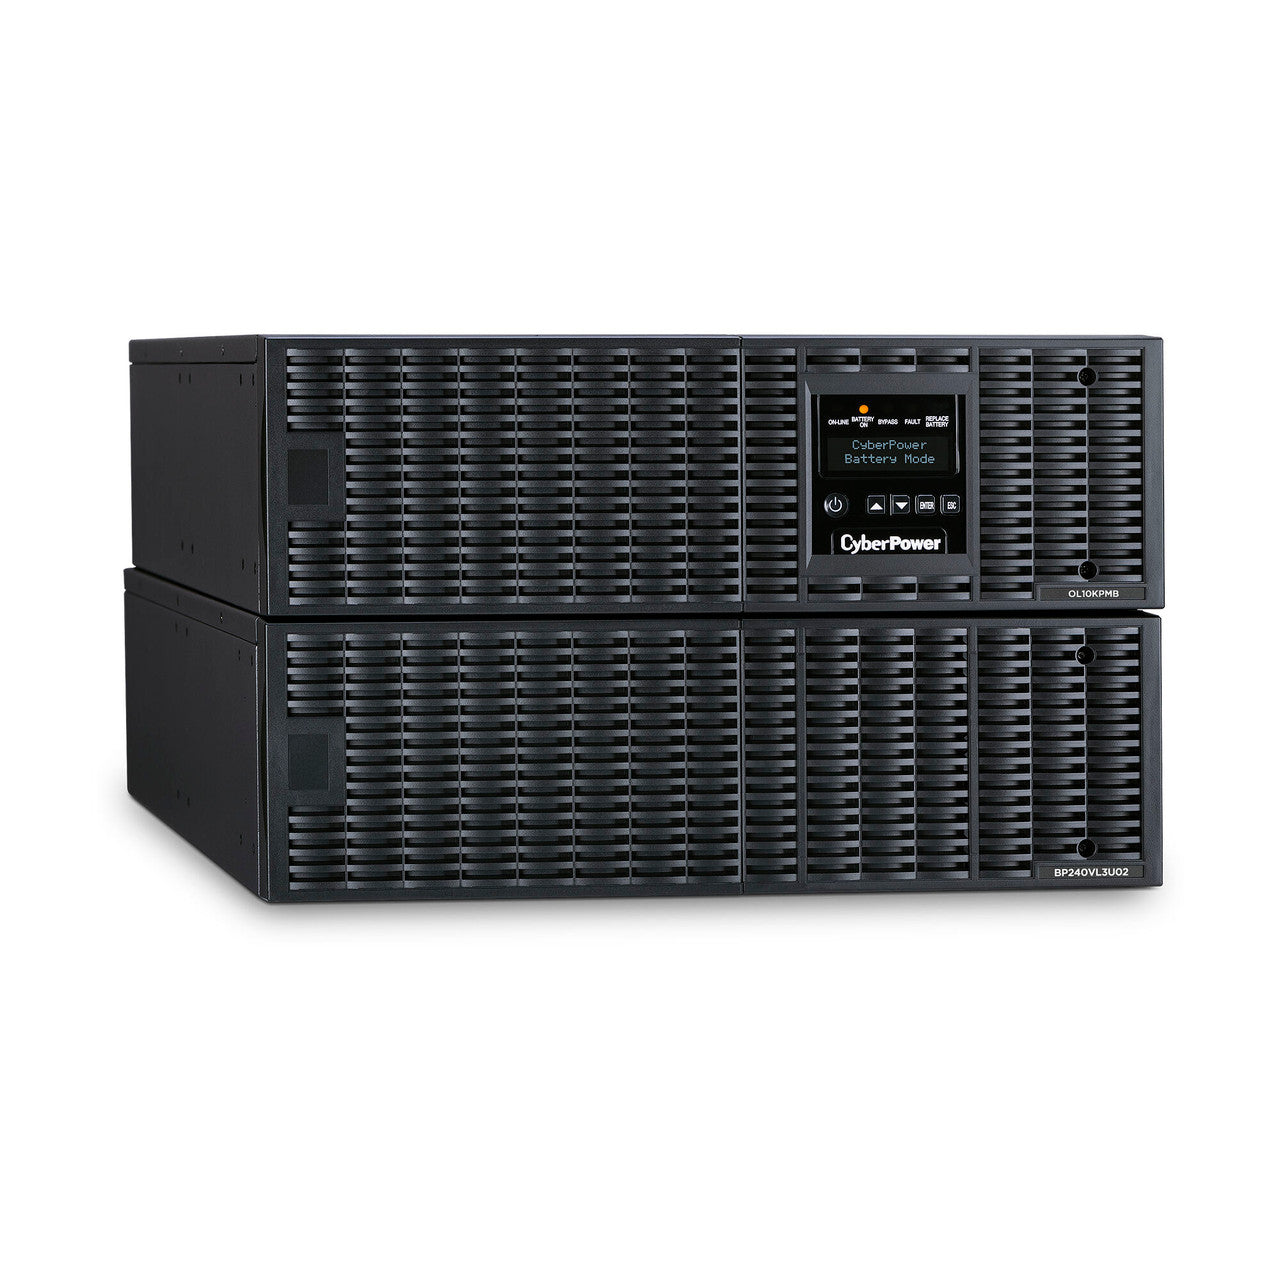 CyberPower OL10KRTHW 10KVA/10KW, online double-conversion UPS, maintenance bypass switch